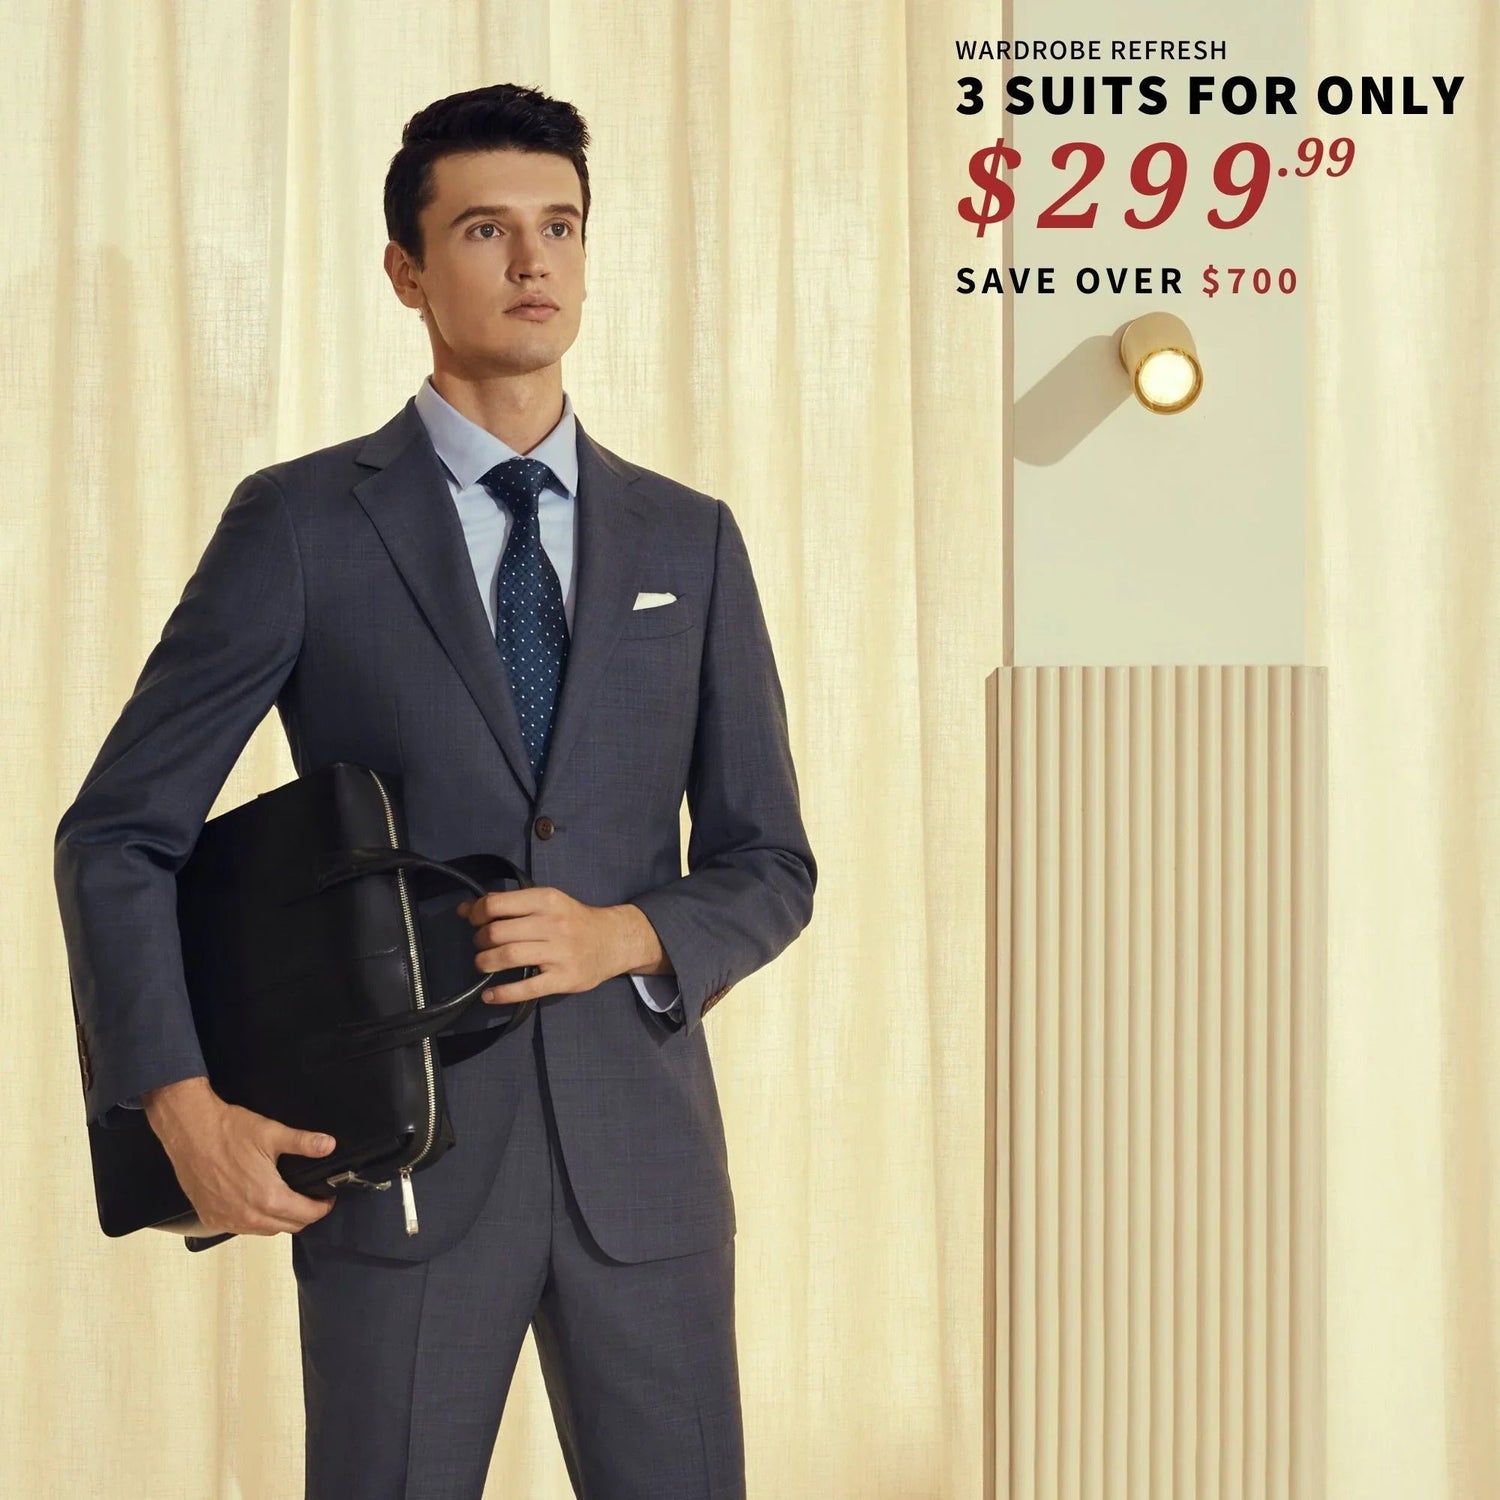 A man in a suit with unhemmed pants holding a helmet stands next to an advertisement for an online-only BYOB suit sale featuring 3 Suits for $299.